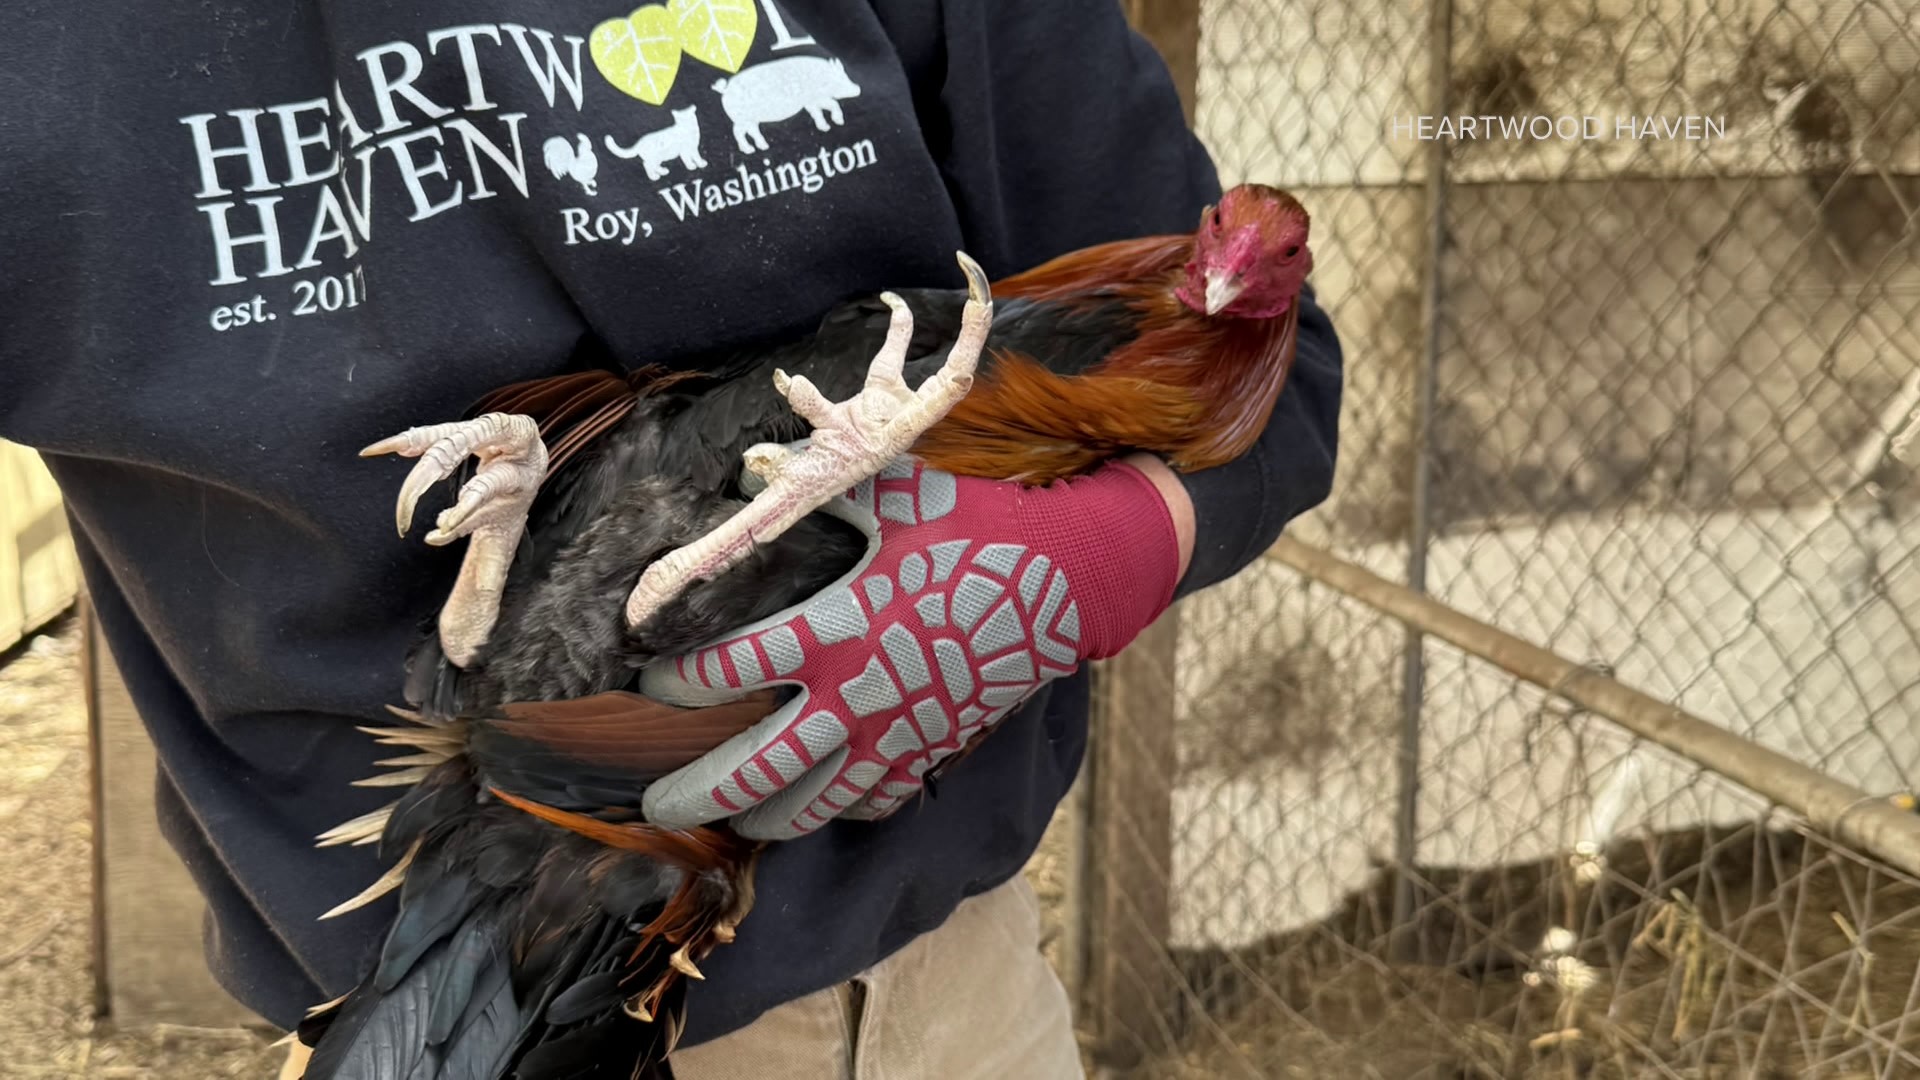 Heartwood Haven is asking for support after rescuing over 100 roosters from a cockfighting ring in Washington.